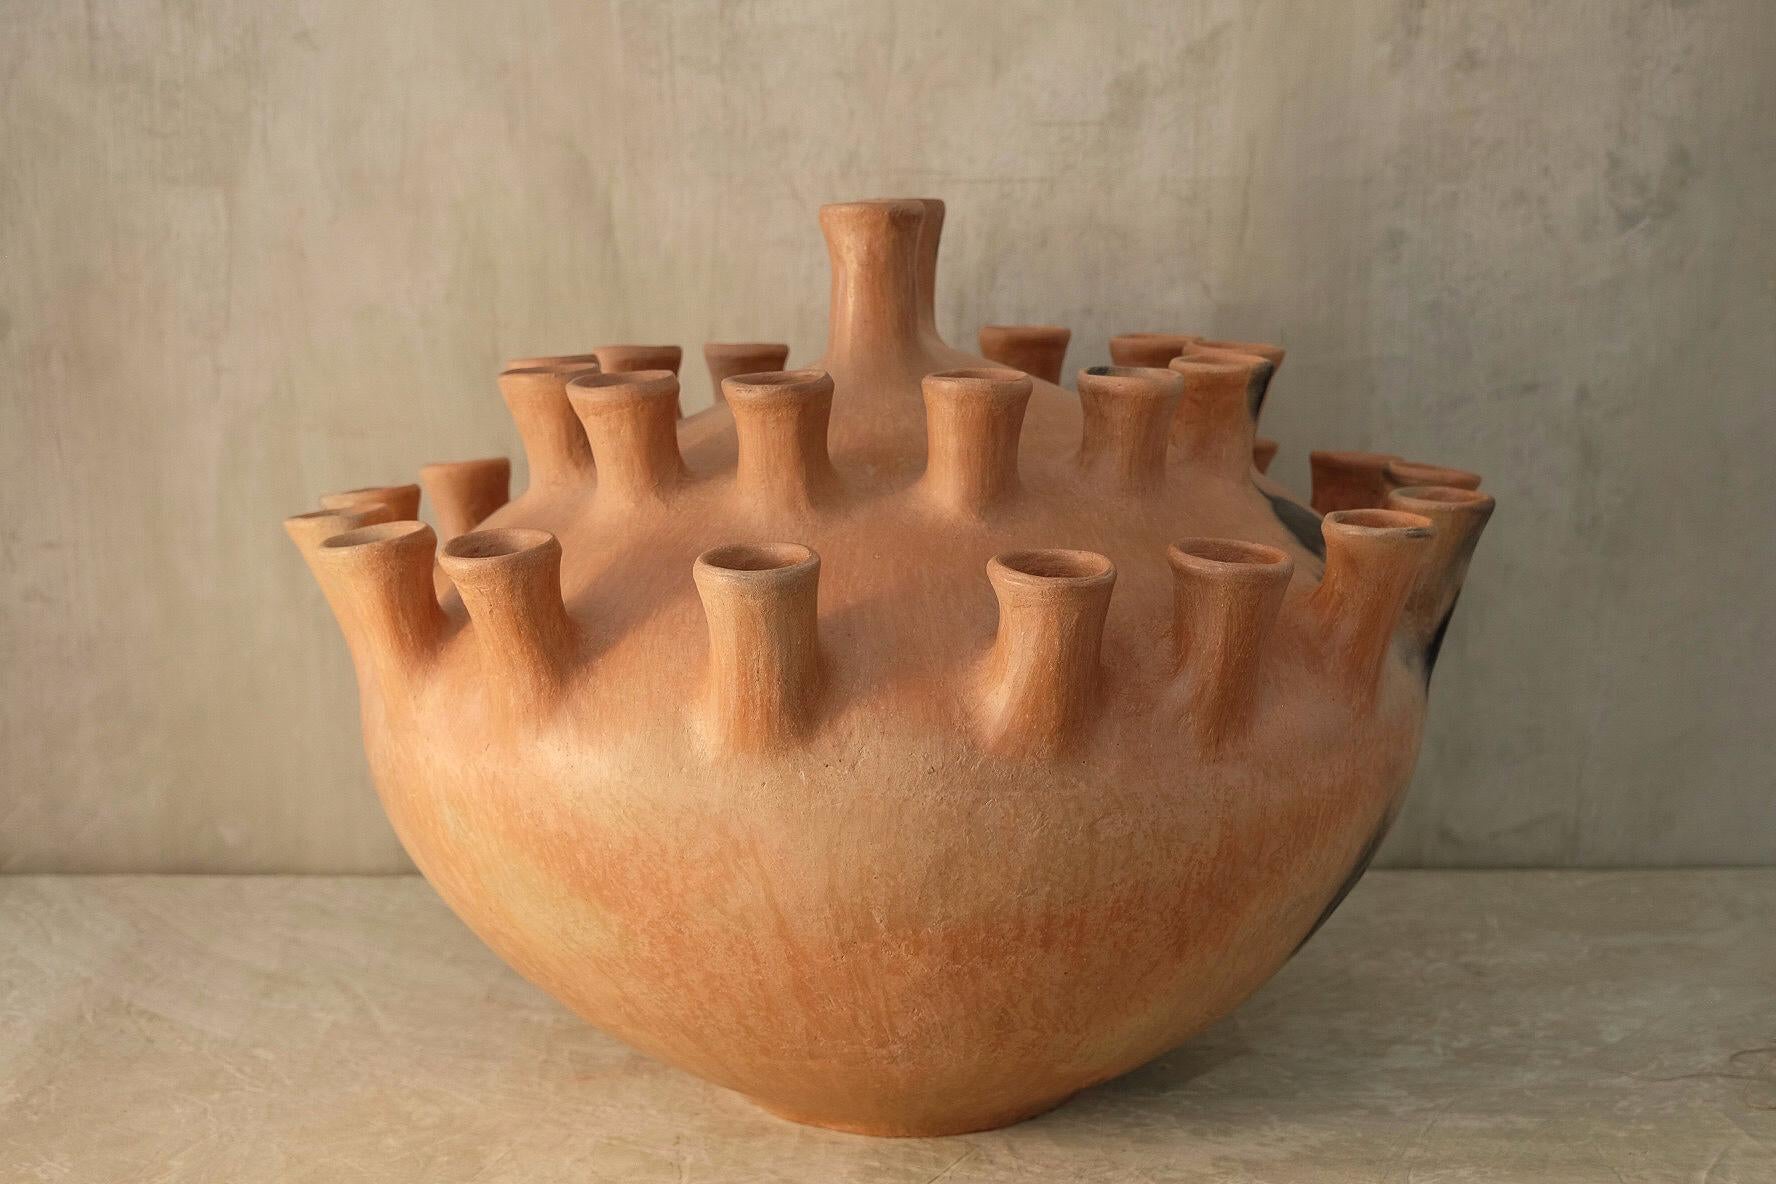 Zoila Vase by Onora
Dimensions: D 70 x H 70 cm
Materials: Clay

Inspired in the traditional large format vessels used to store water, grains or prepare food, our playful reinterpretation of Mixe pottery plays homage to this region’s 21 mountains